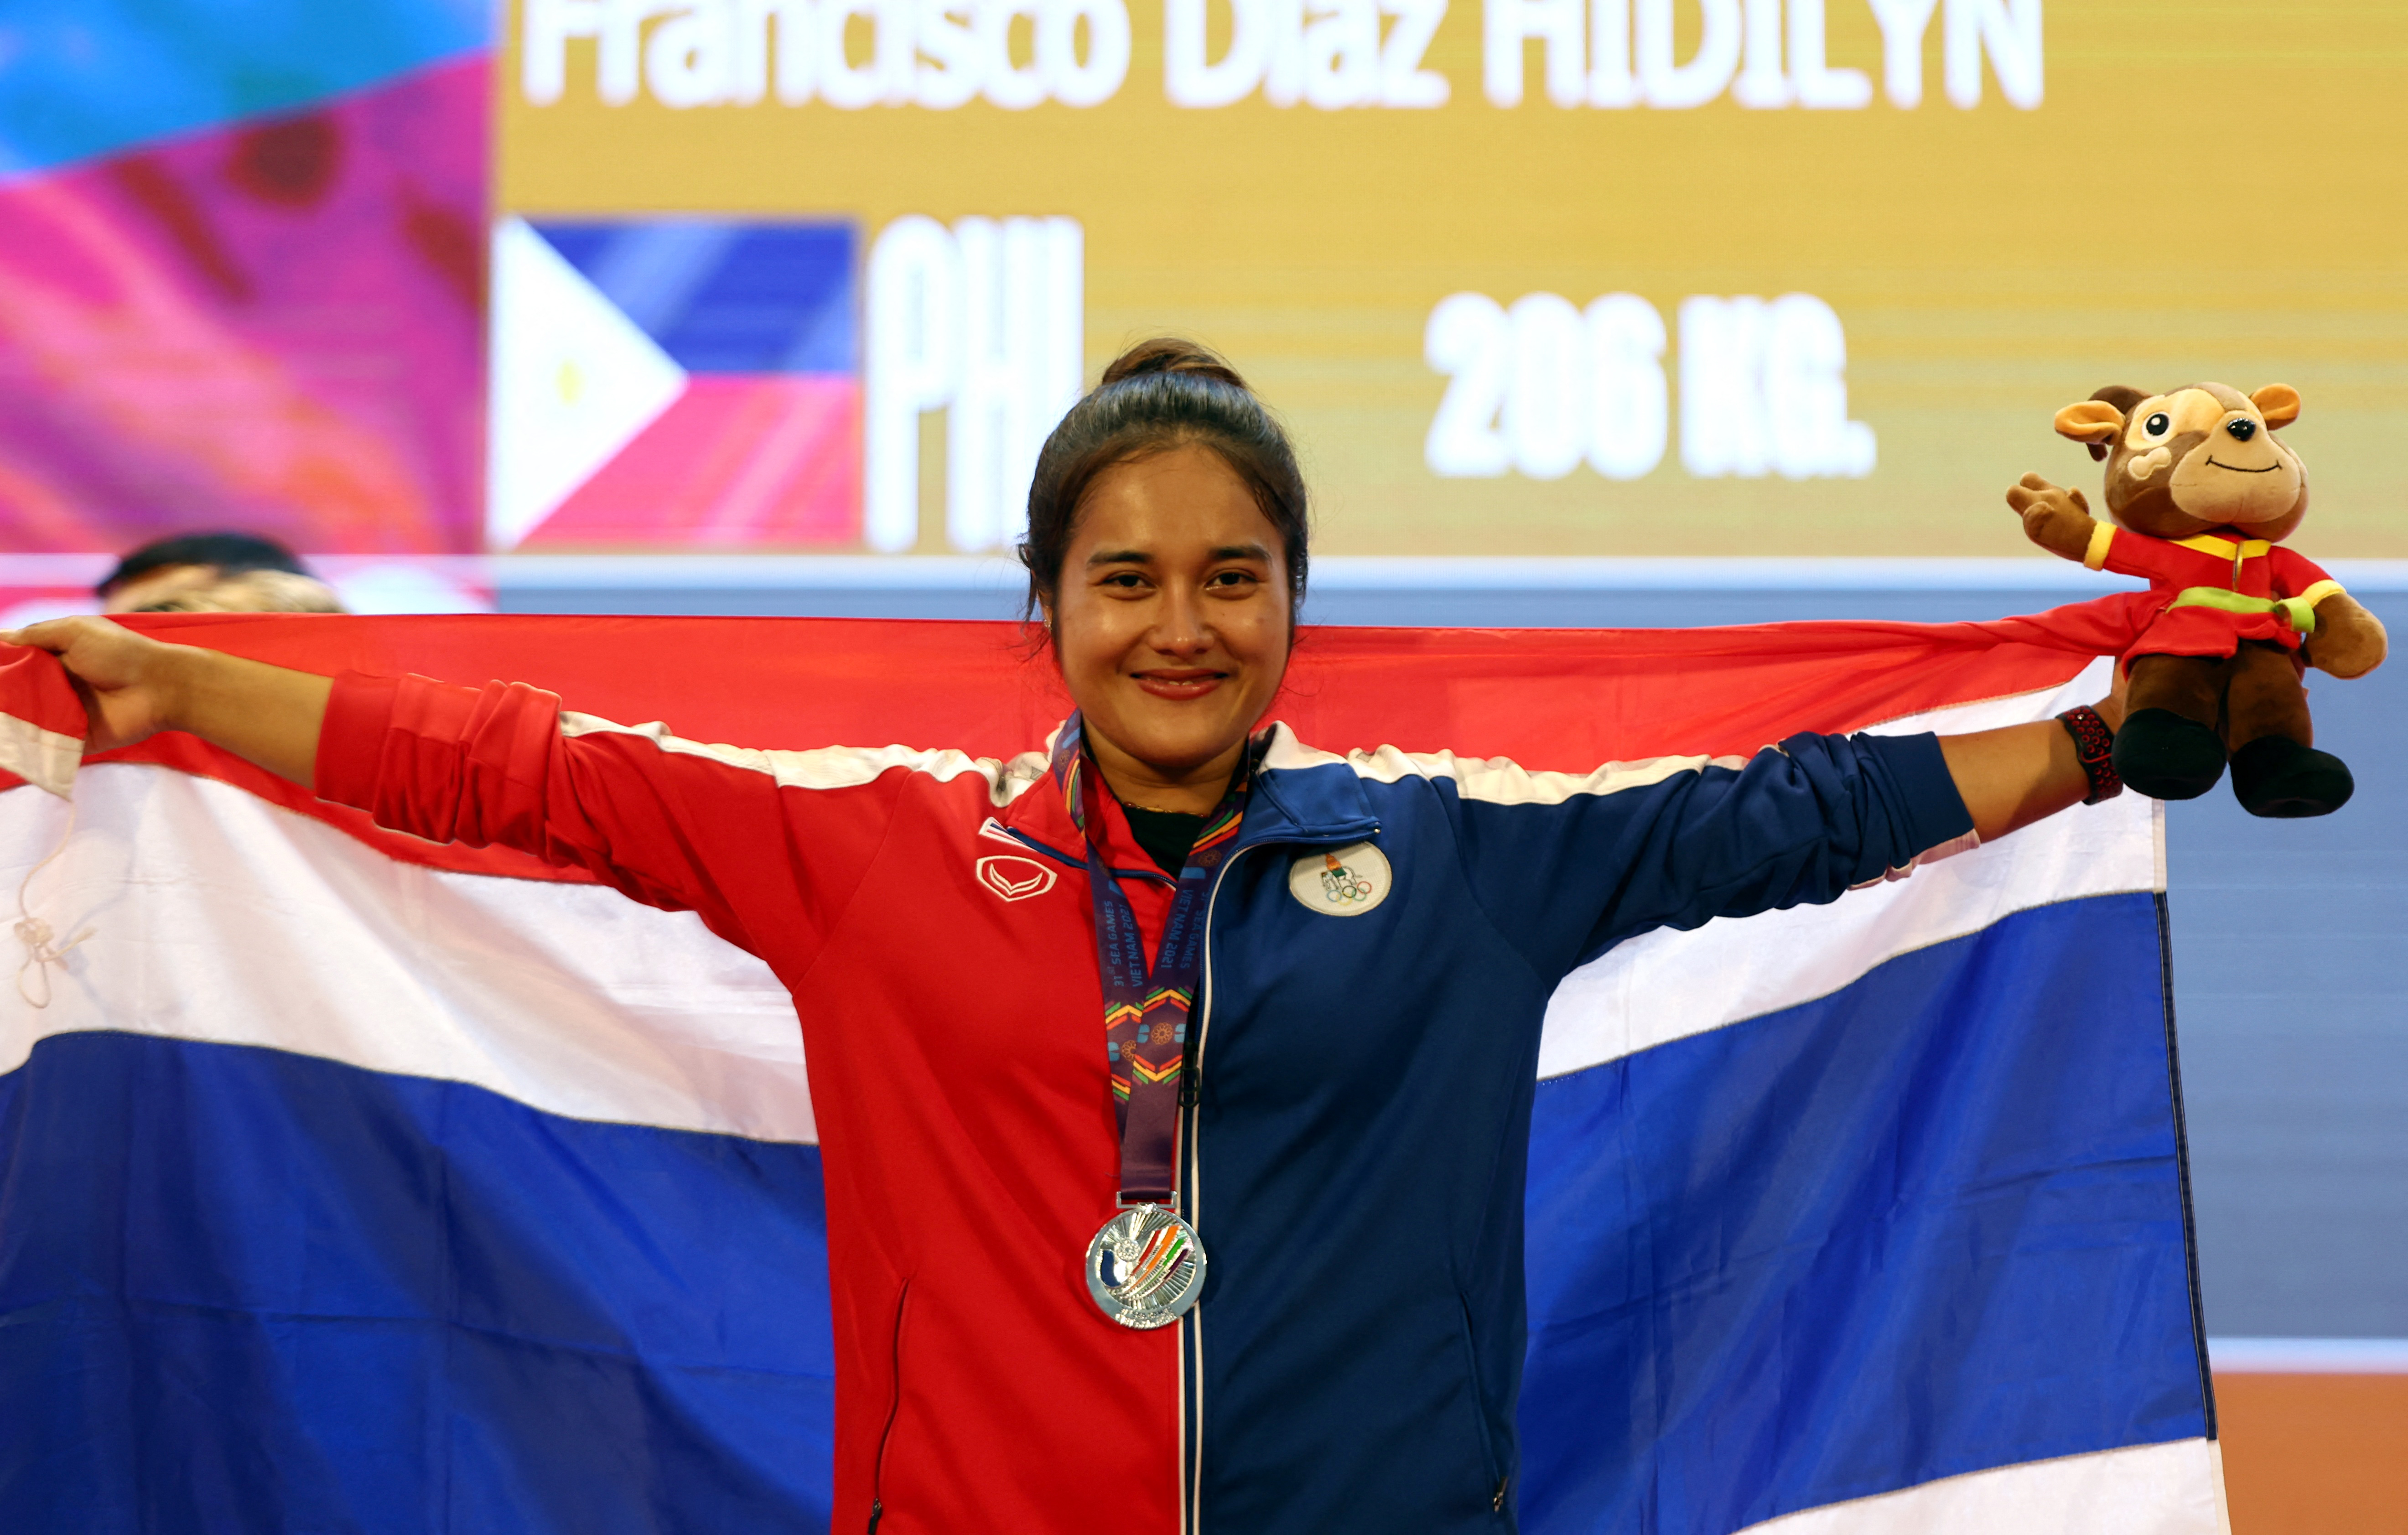 Southeast Asian Games - Weightlifting - Hanoi Sports Training and Competition Center, Hanoi, Vietnam - May 20, 2022 Thailand's Sanikun Tanasan celebrates on the podium after winning the silver medal in the women's 55kg REUTERS/Chalinee Thirasupa